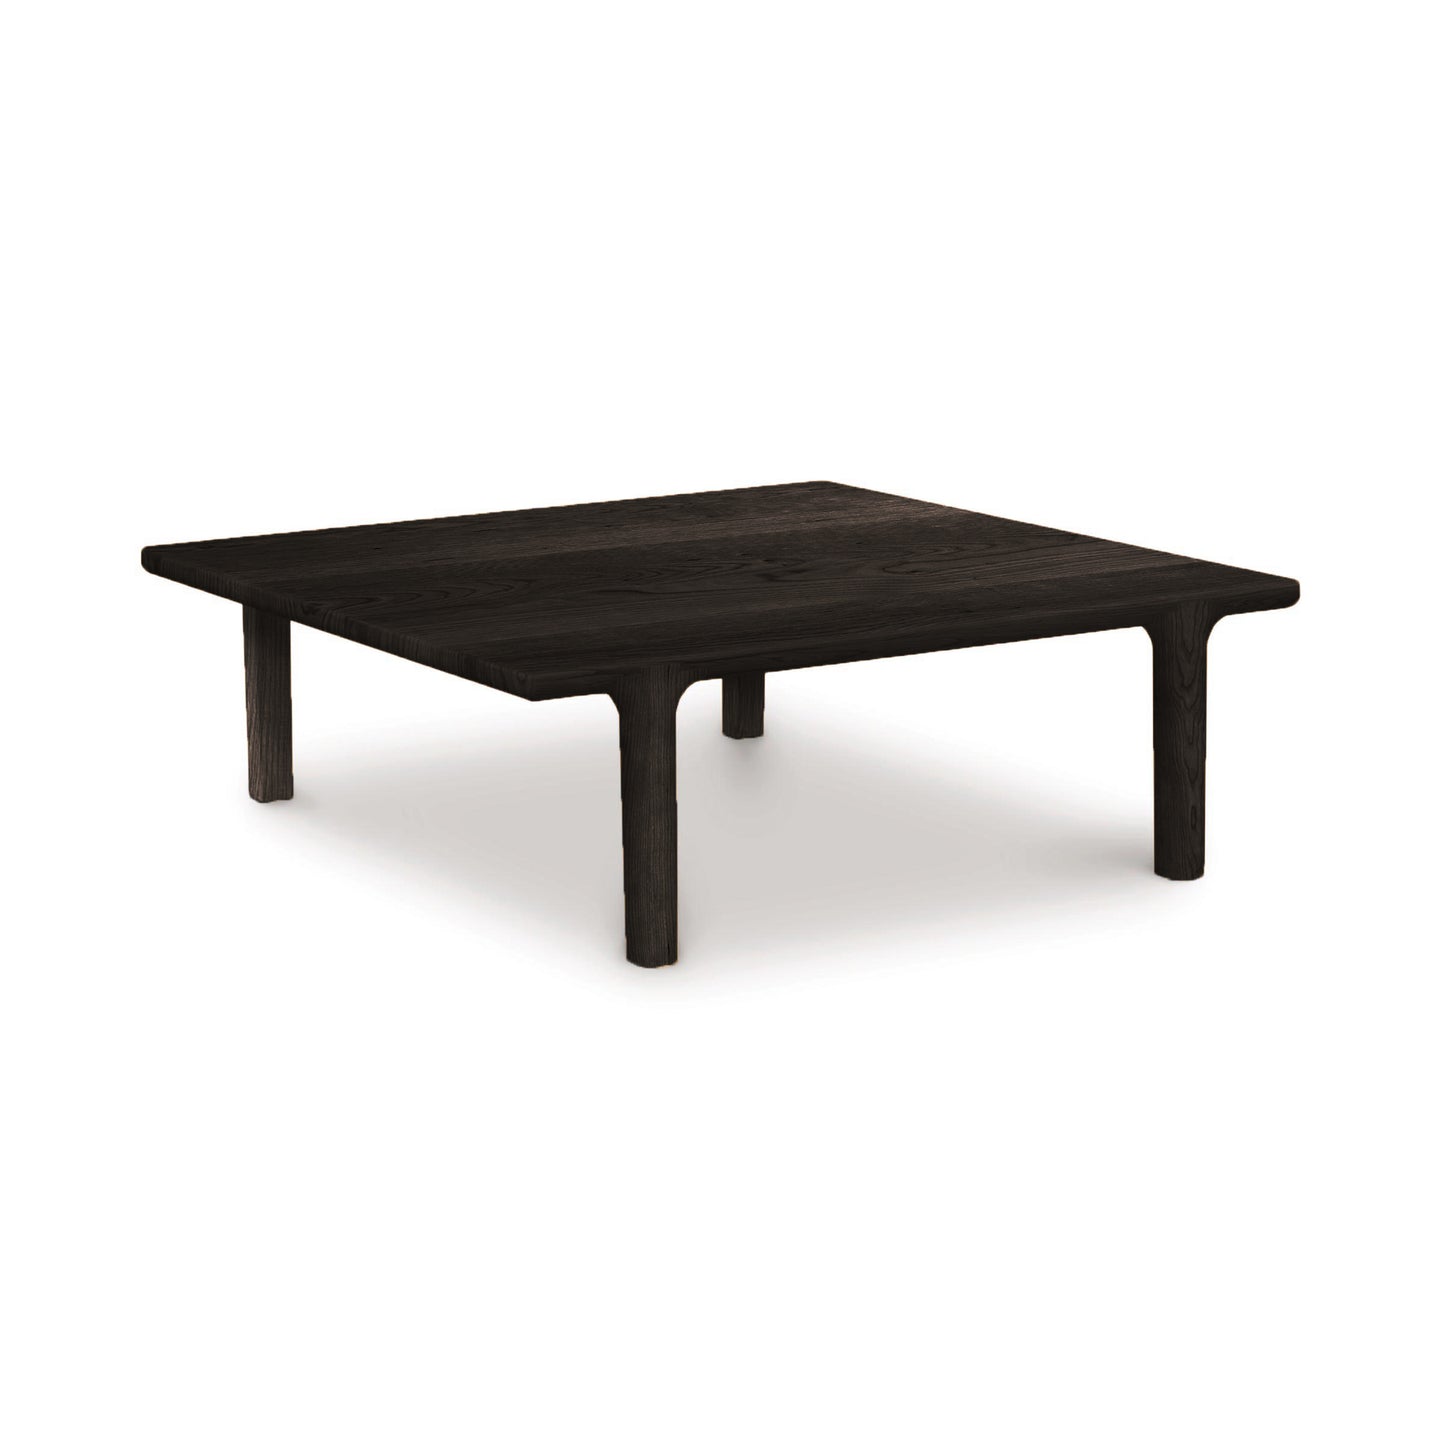 A contemporary Sierra Square Coffee Table by Copeland Furniture with legs.